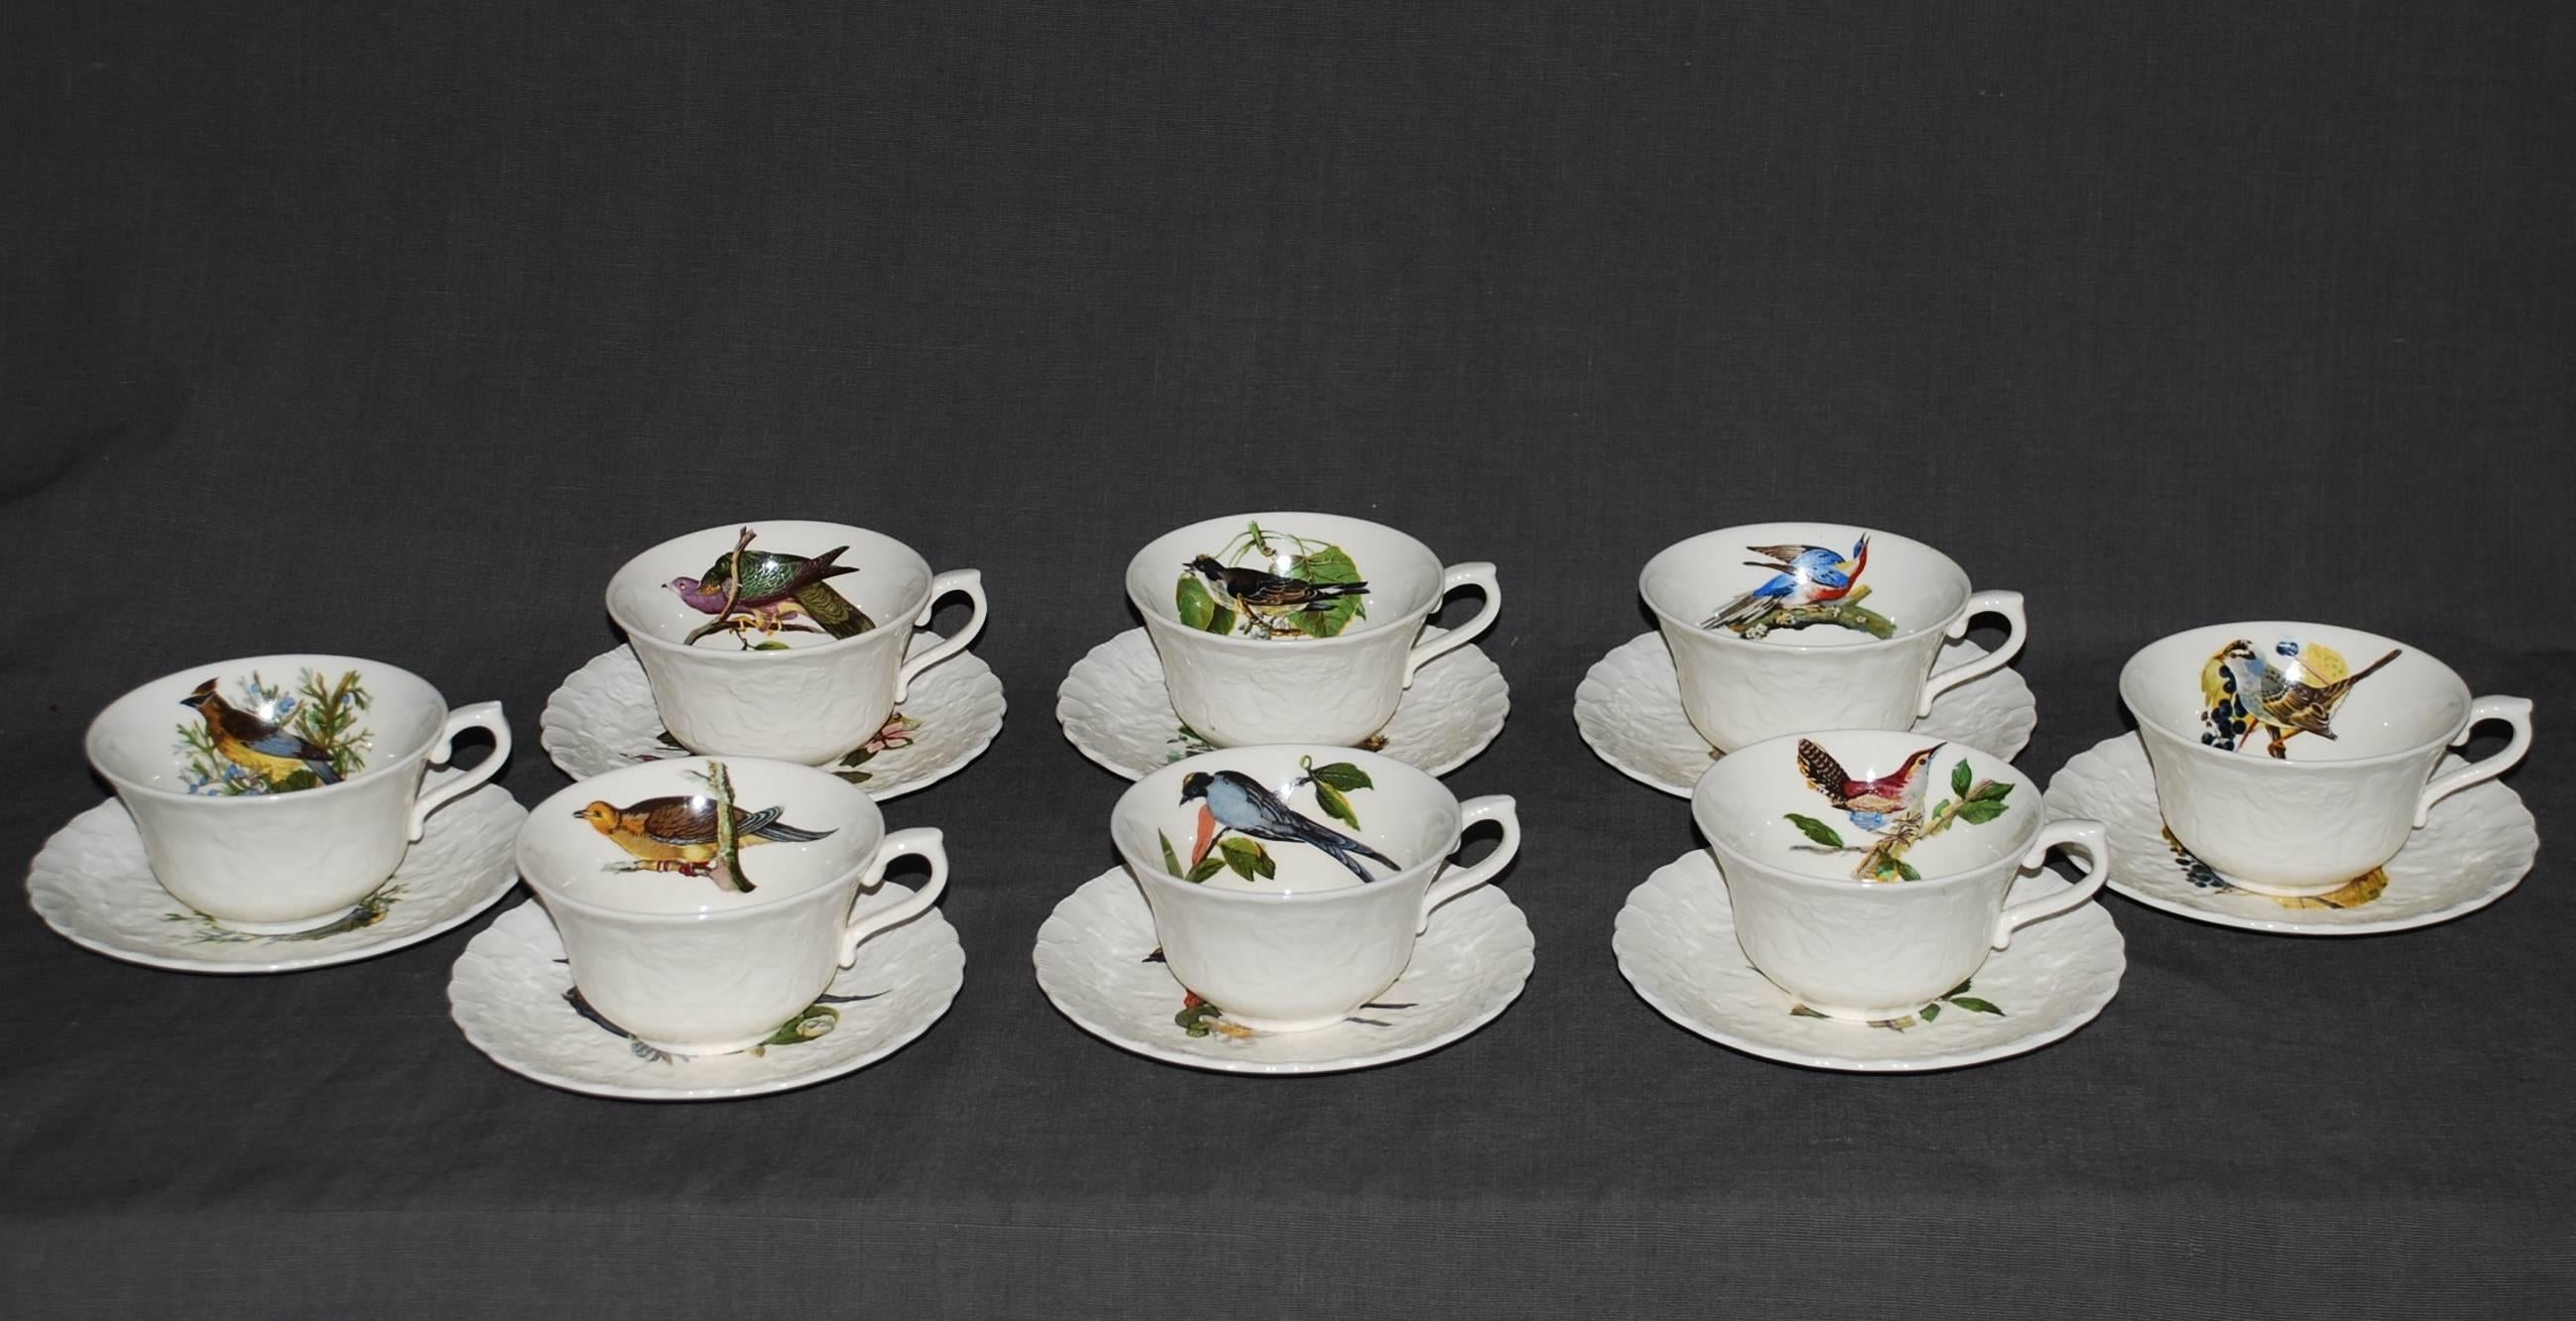 Set of eight audubon birds of America tea/coffee cups and saucers in cream with raised floral border centering on eight different birds. Alfred Meakin, England, circa 1940.
1-cedar bird #43
1-band tailed pigeon #62
1-white crowned sparrow